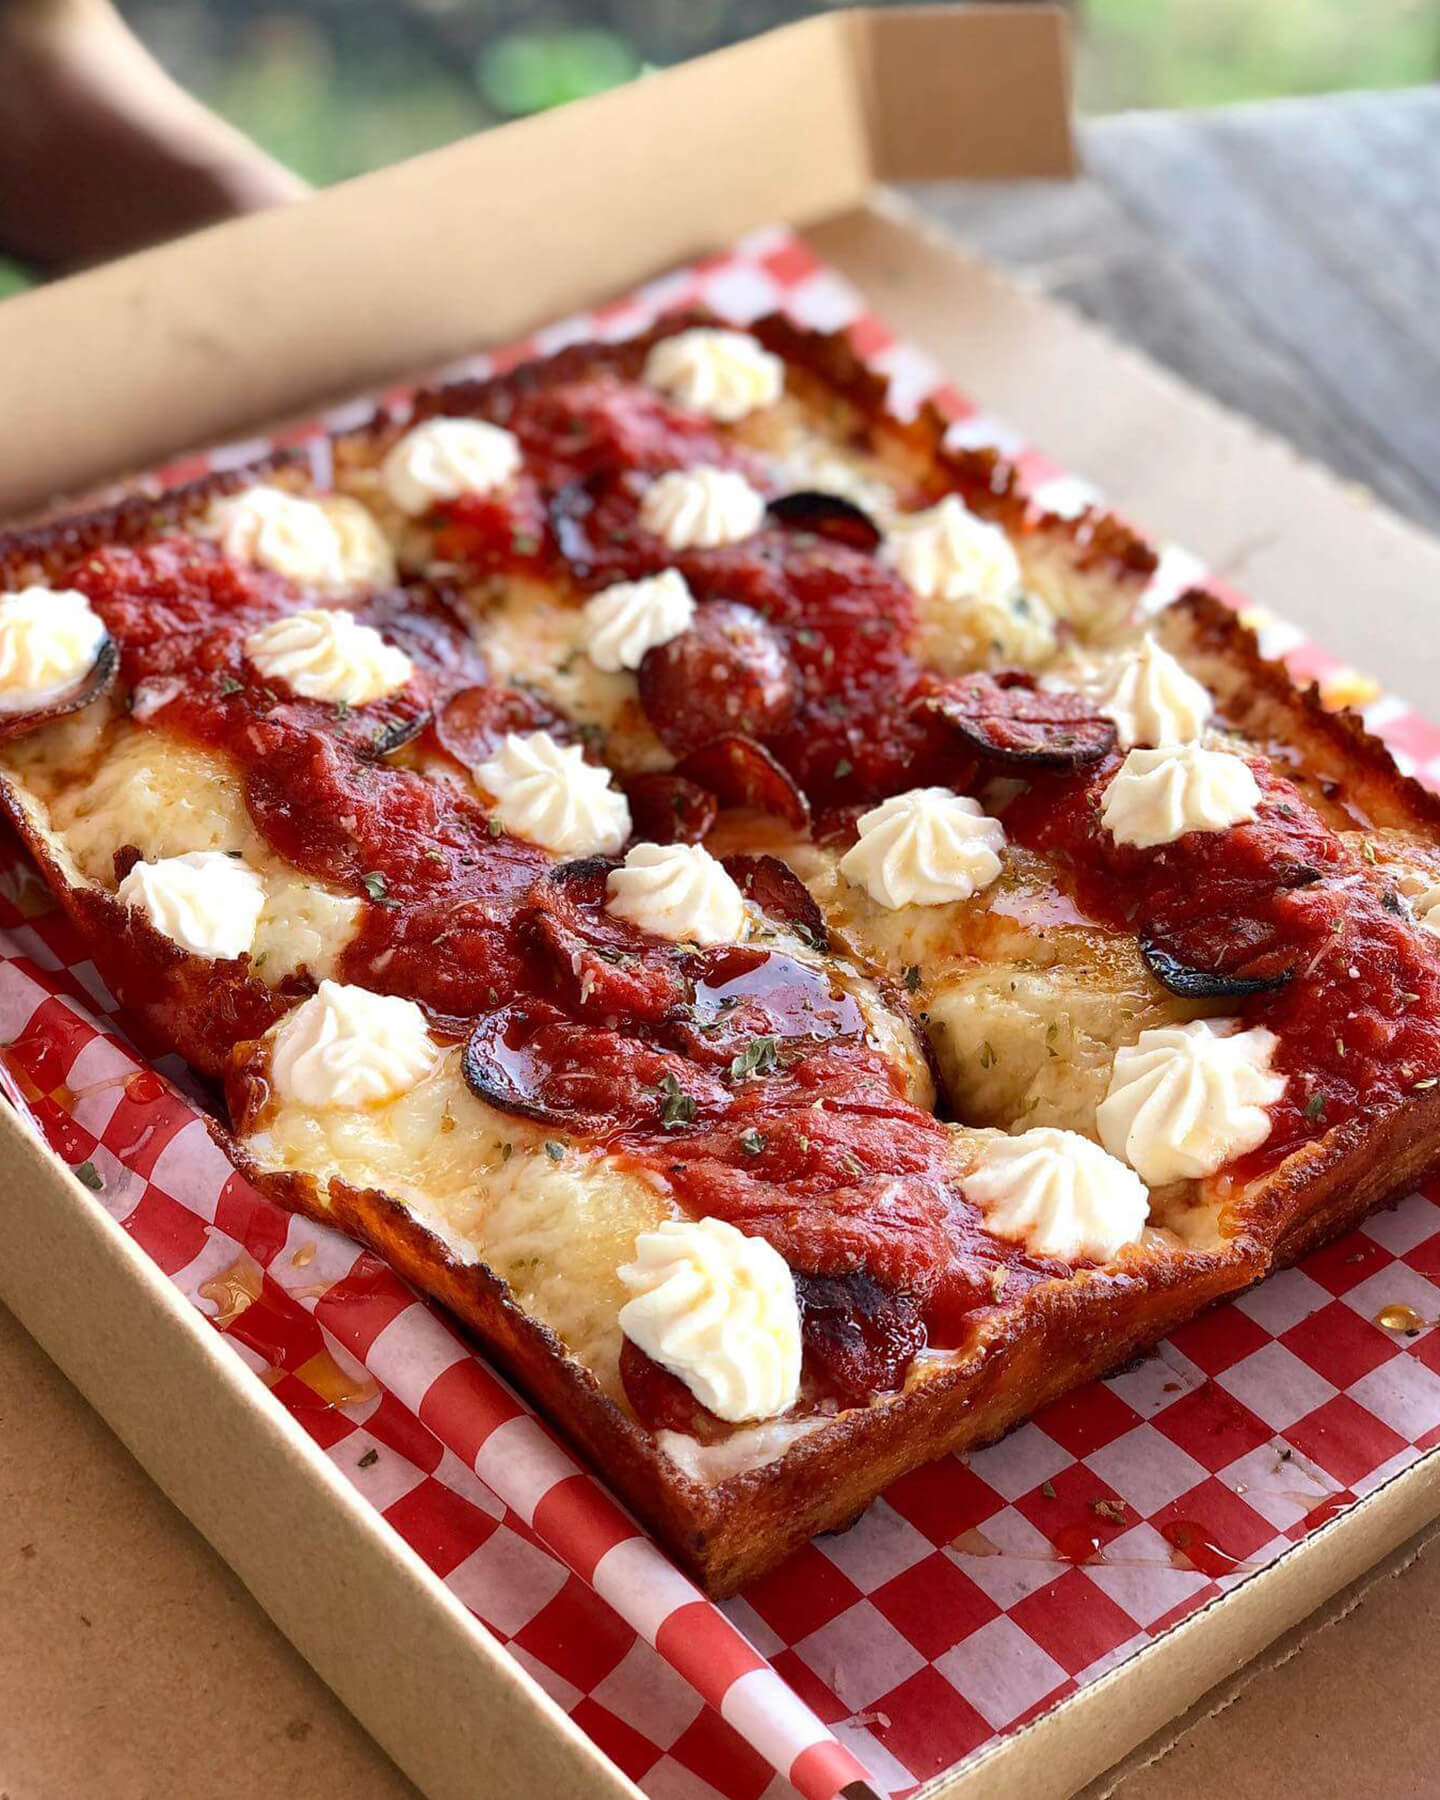 An image of a Sicilian slice of pizza with pepperoni slices on top